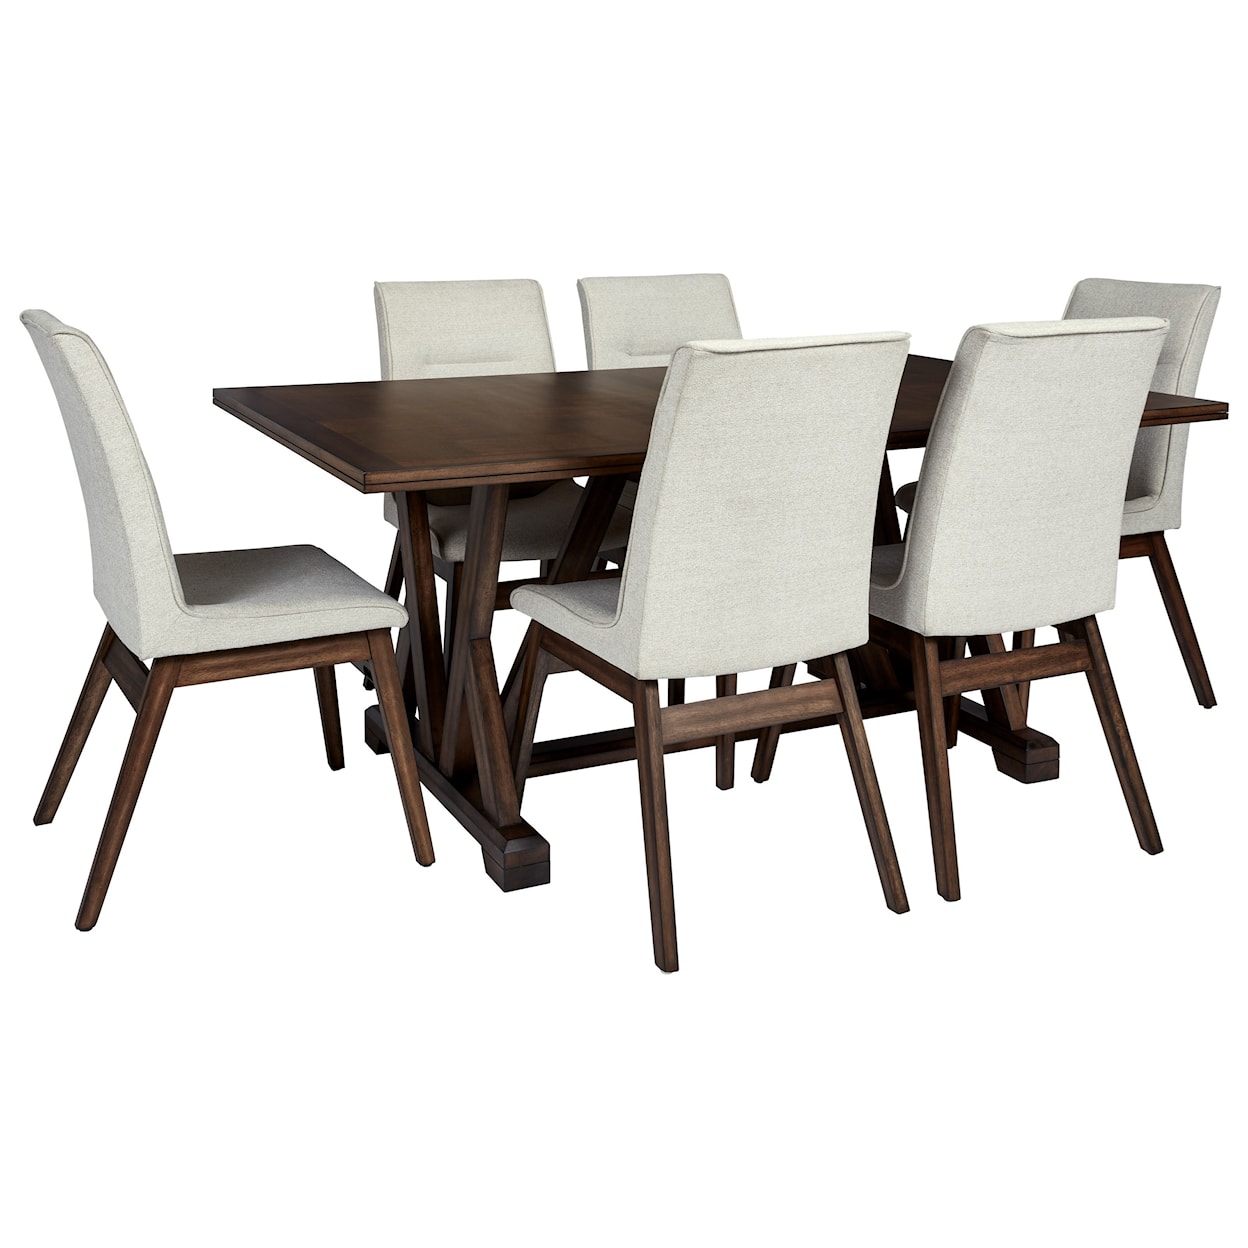 Progressive Furniture Mimosa 7-Piece Table and Chair Set